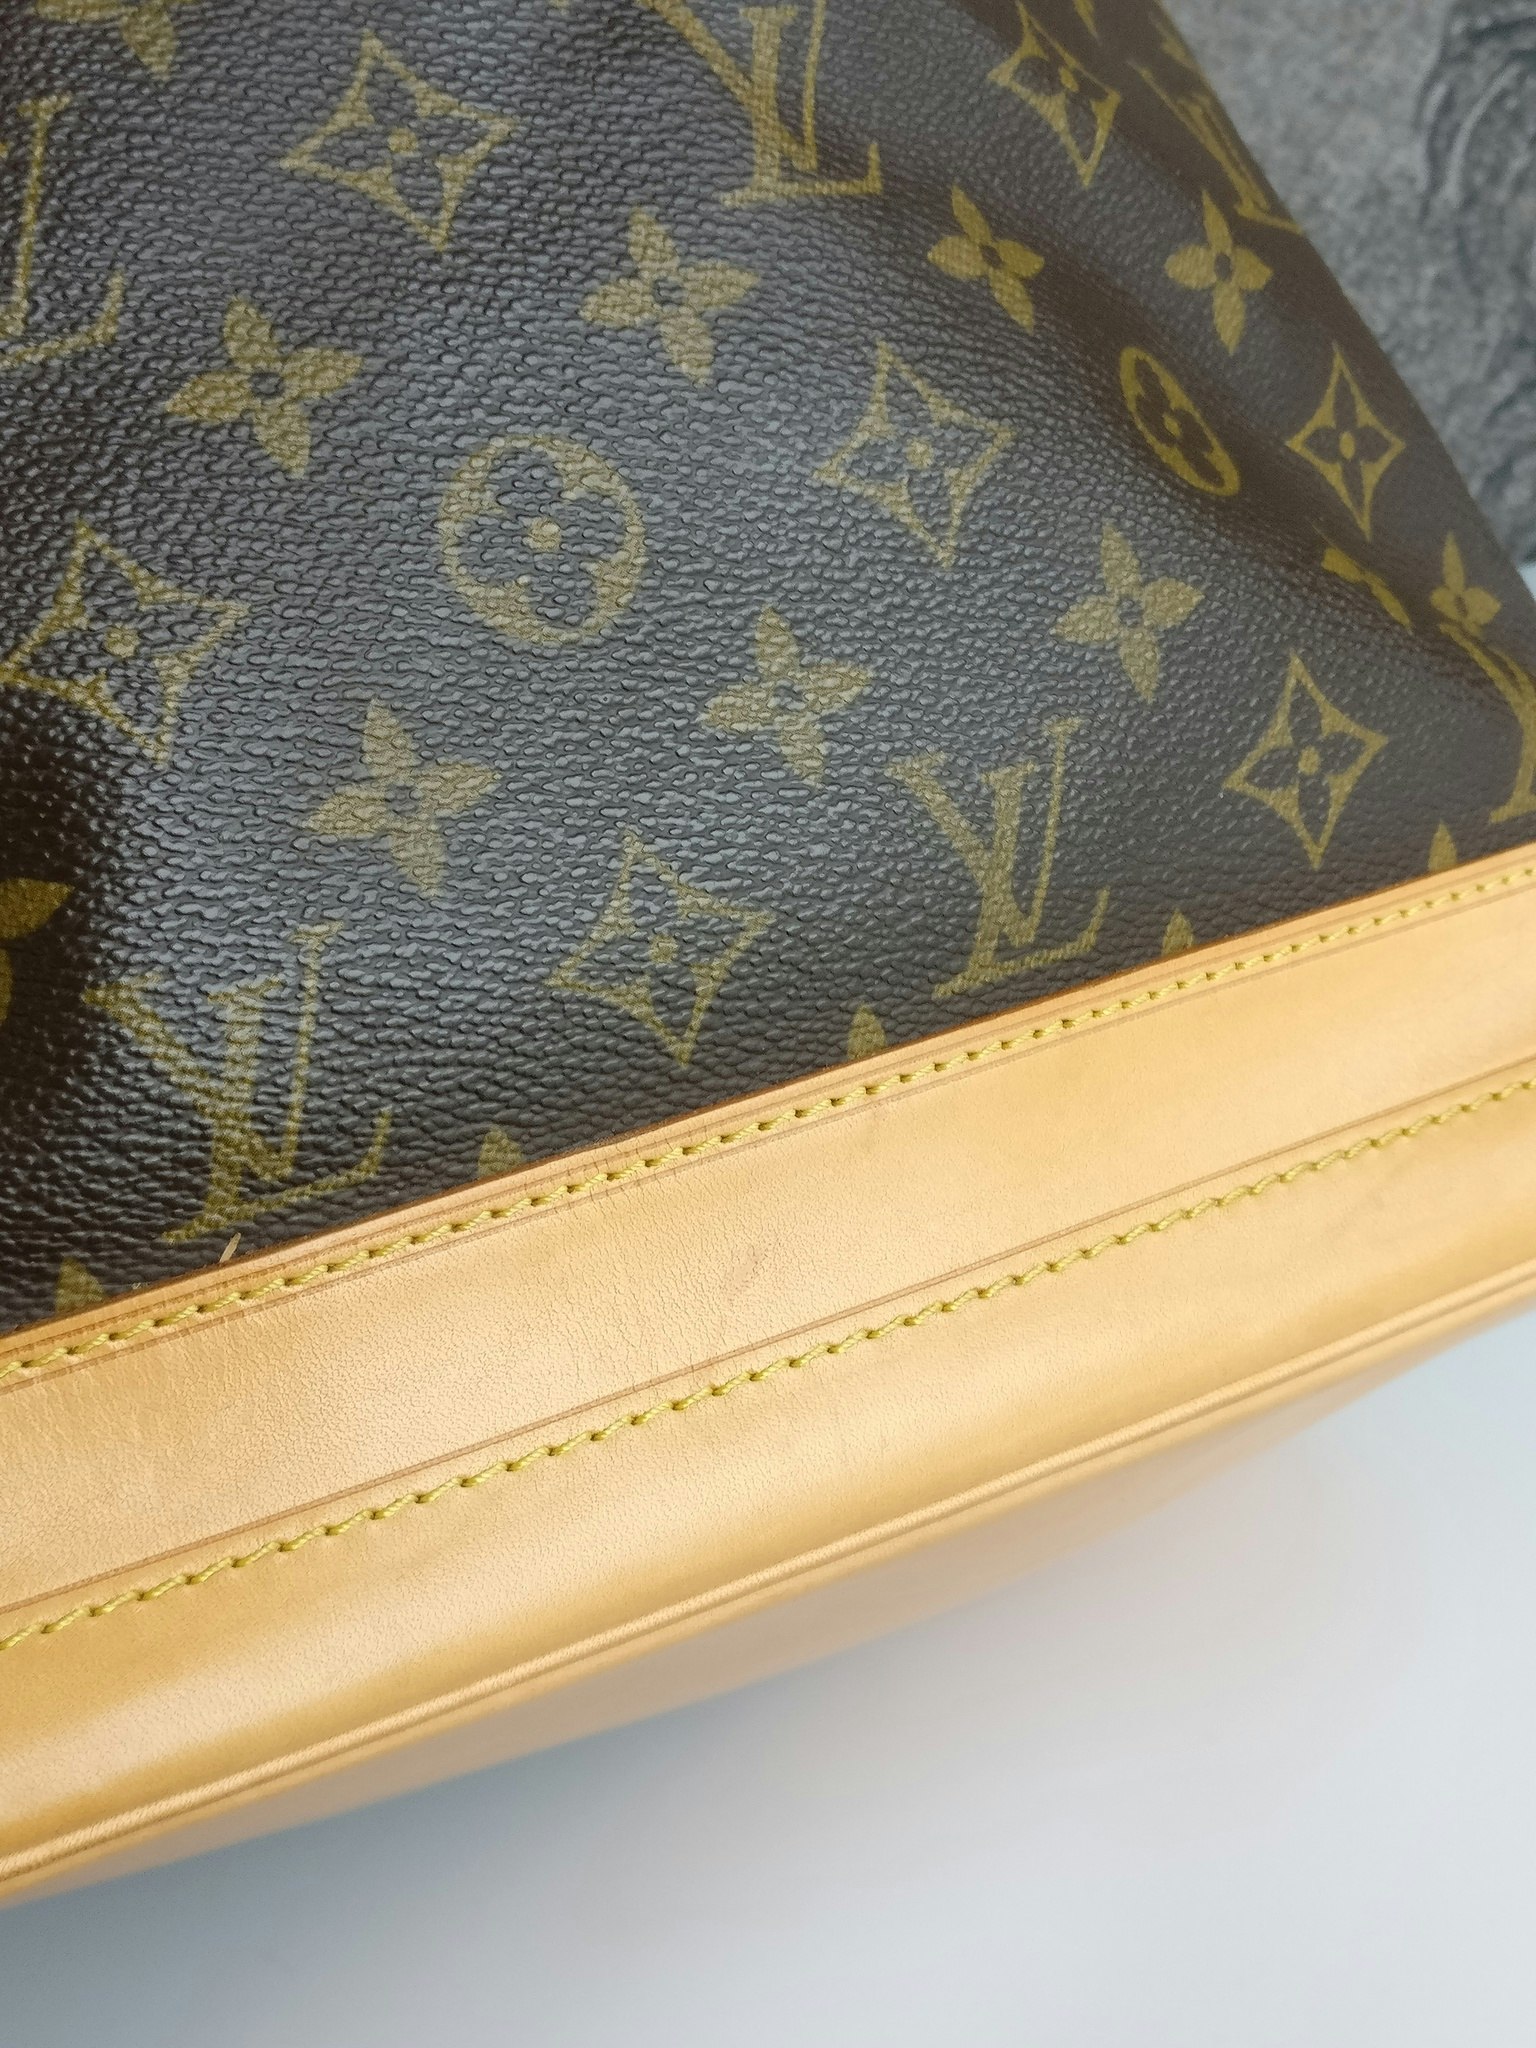 How To Get Water Stains Out Of Louis Vuitton Leather